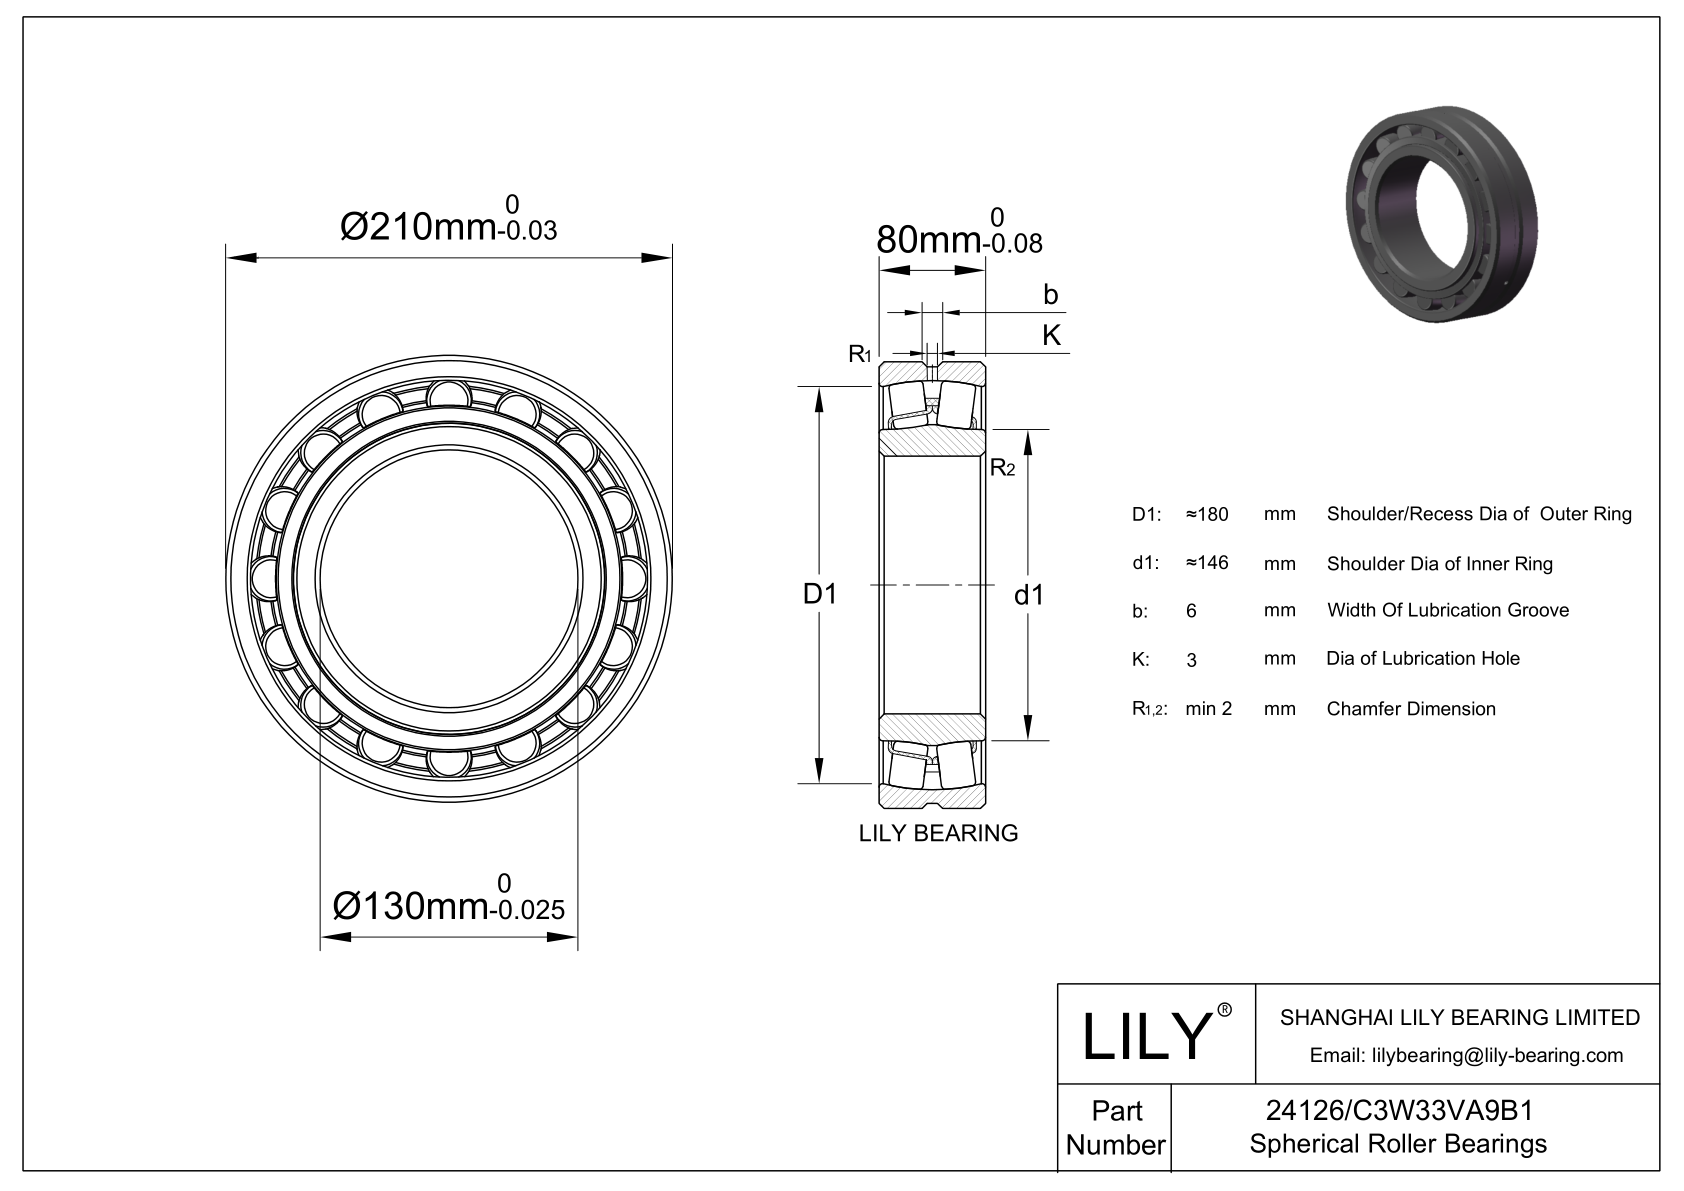 24126/C3W33VA9B1 Double Row Spherical Roller Bearing cad drawing